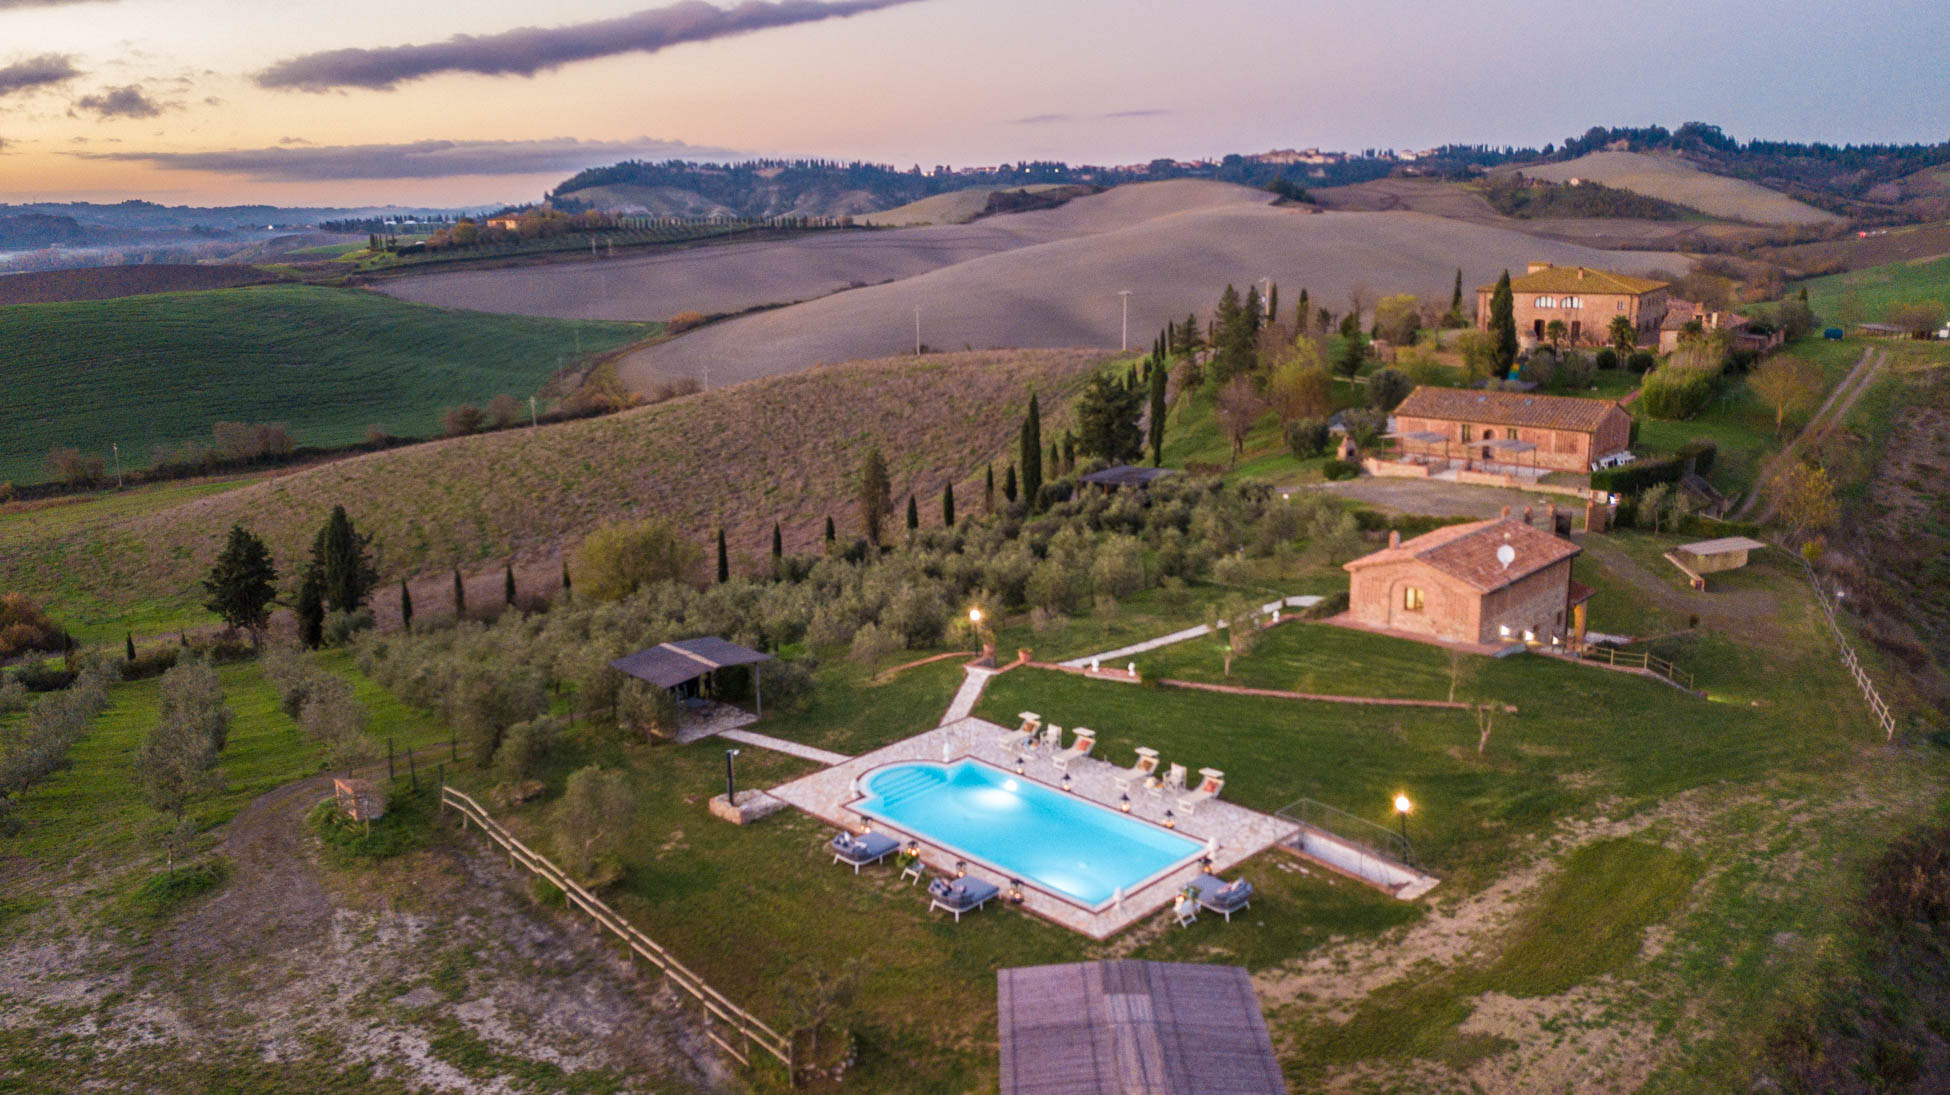 Villa/Dettached house in Fabbrica - VILLA LAJATICO Farmhouse with Private Pool and the Most Exciting View over the Hilltops